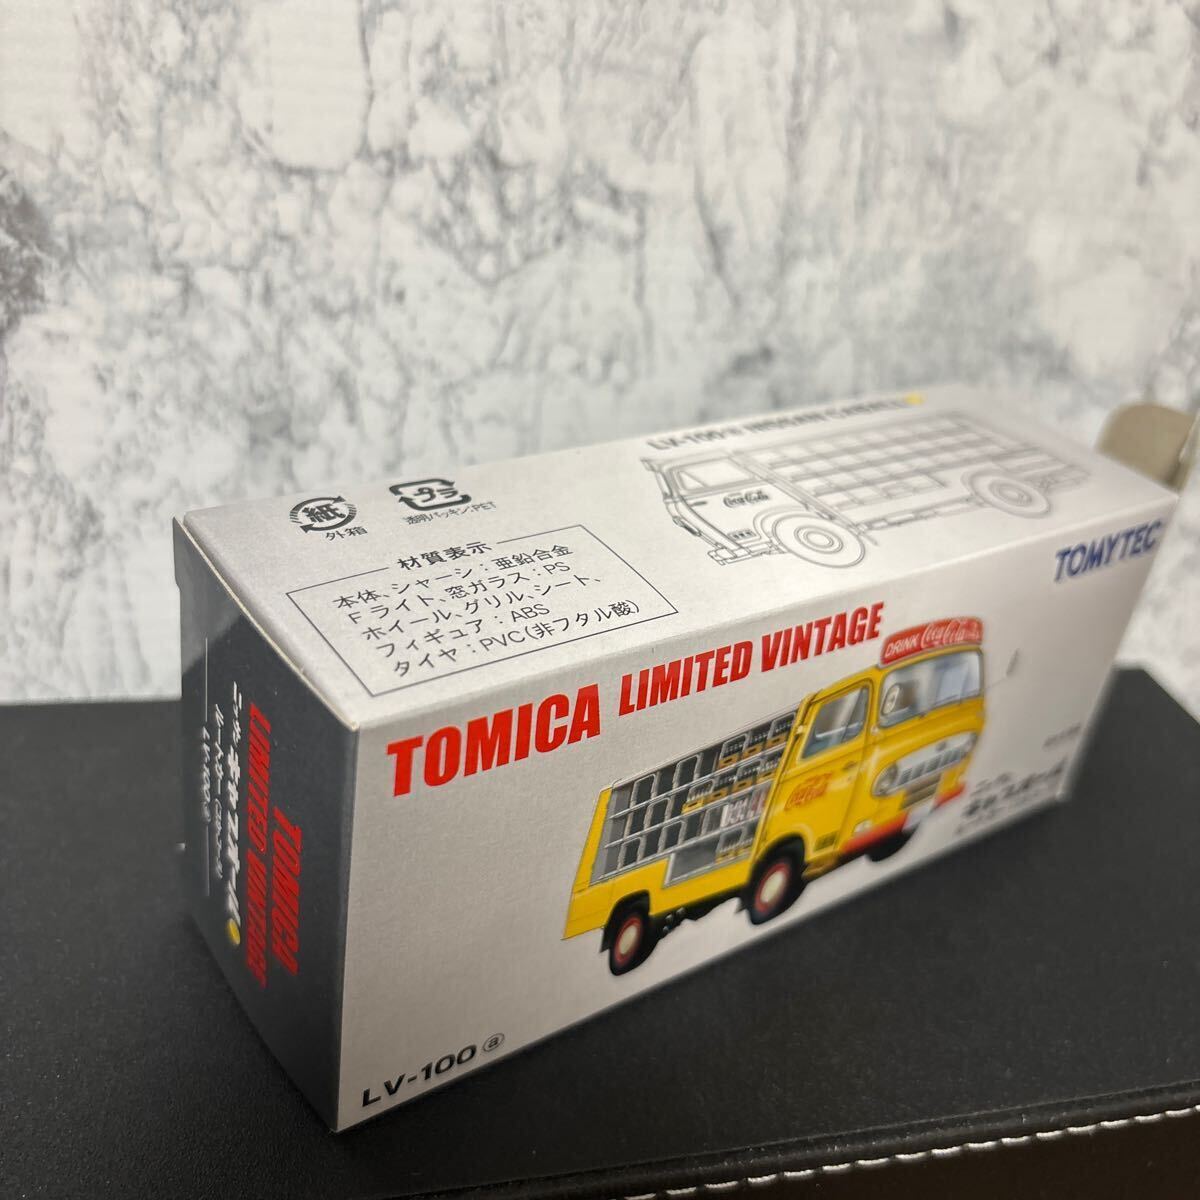 [ beautiful goods ]LV-100a cab all route car Coca * Cola ( yellow color ) 1/64 scale Tomica Limited Vintage 